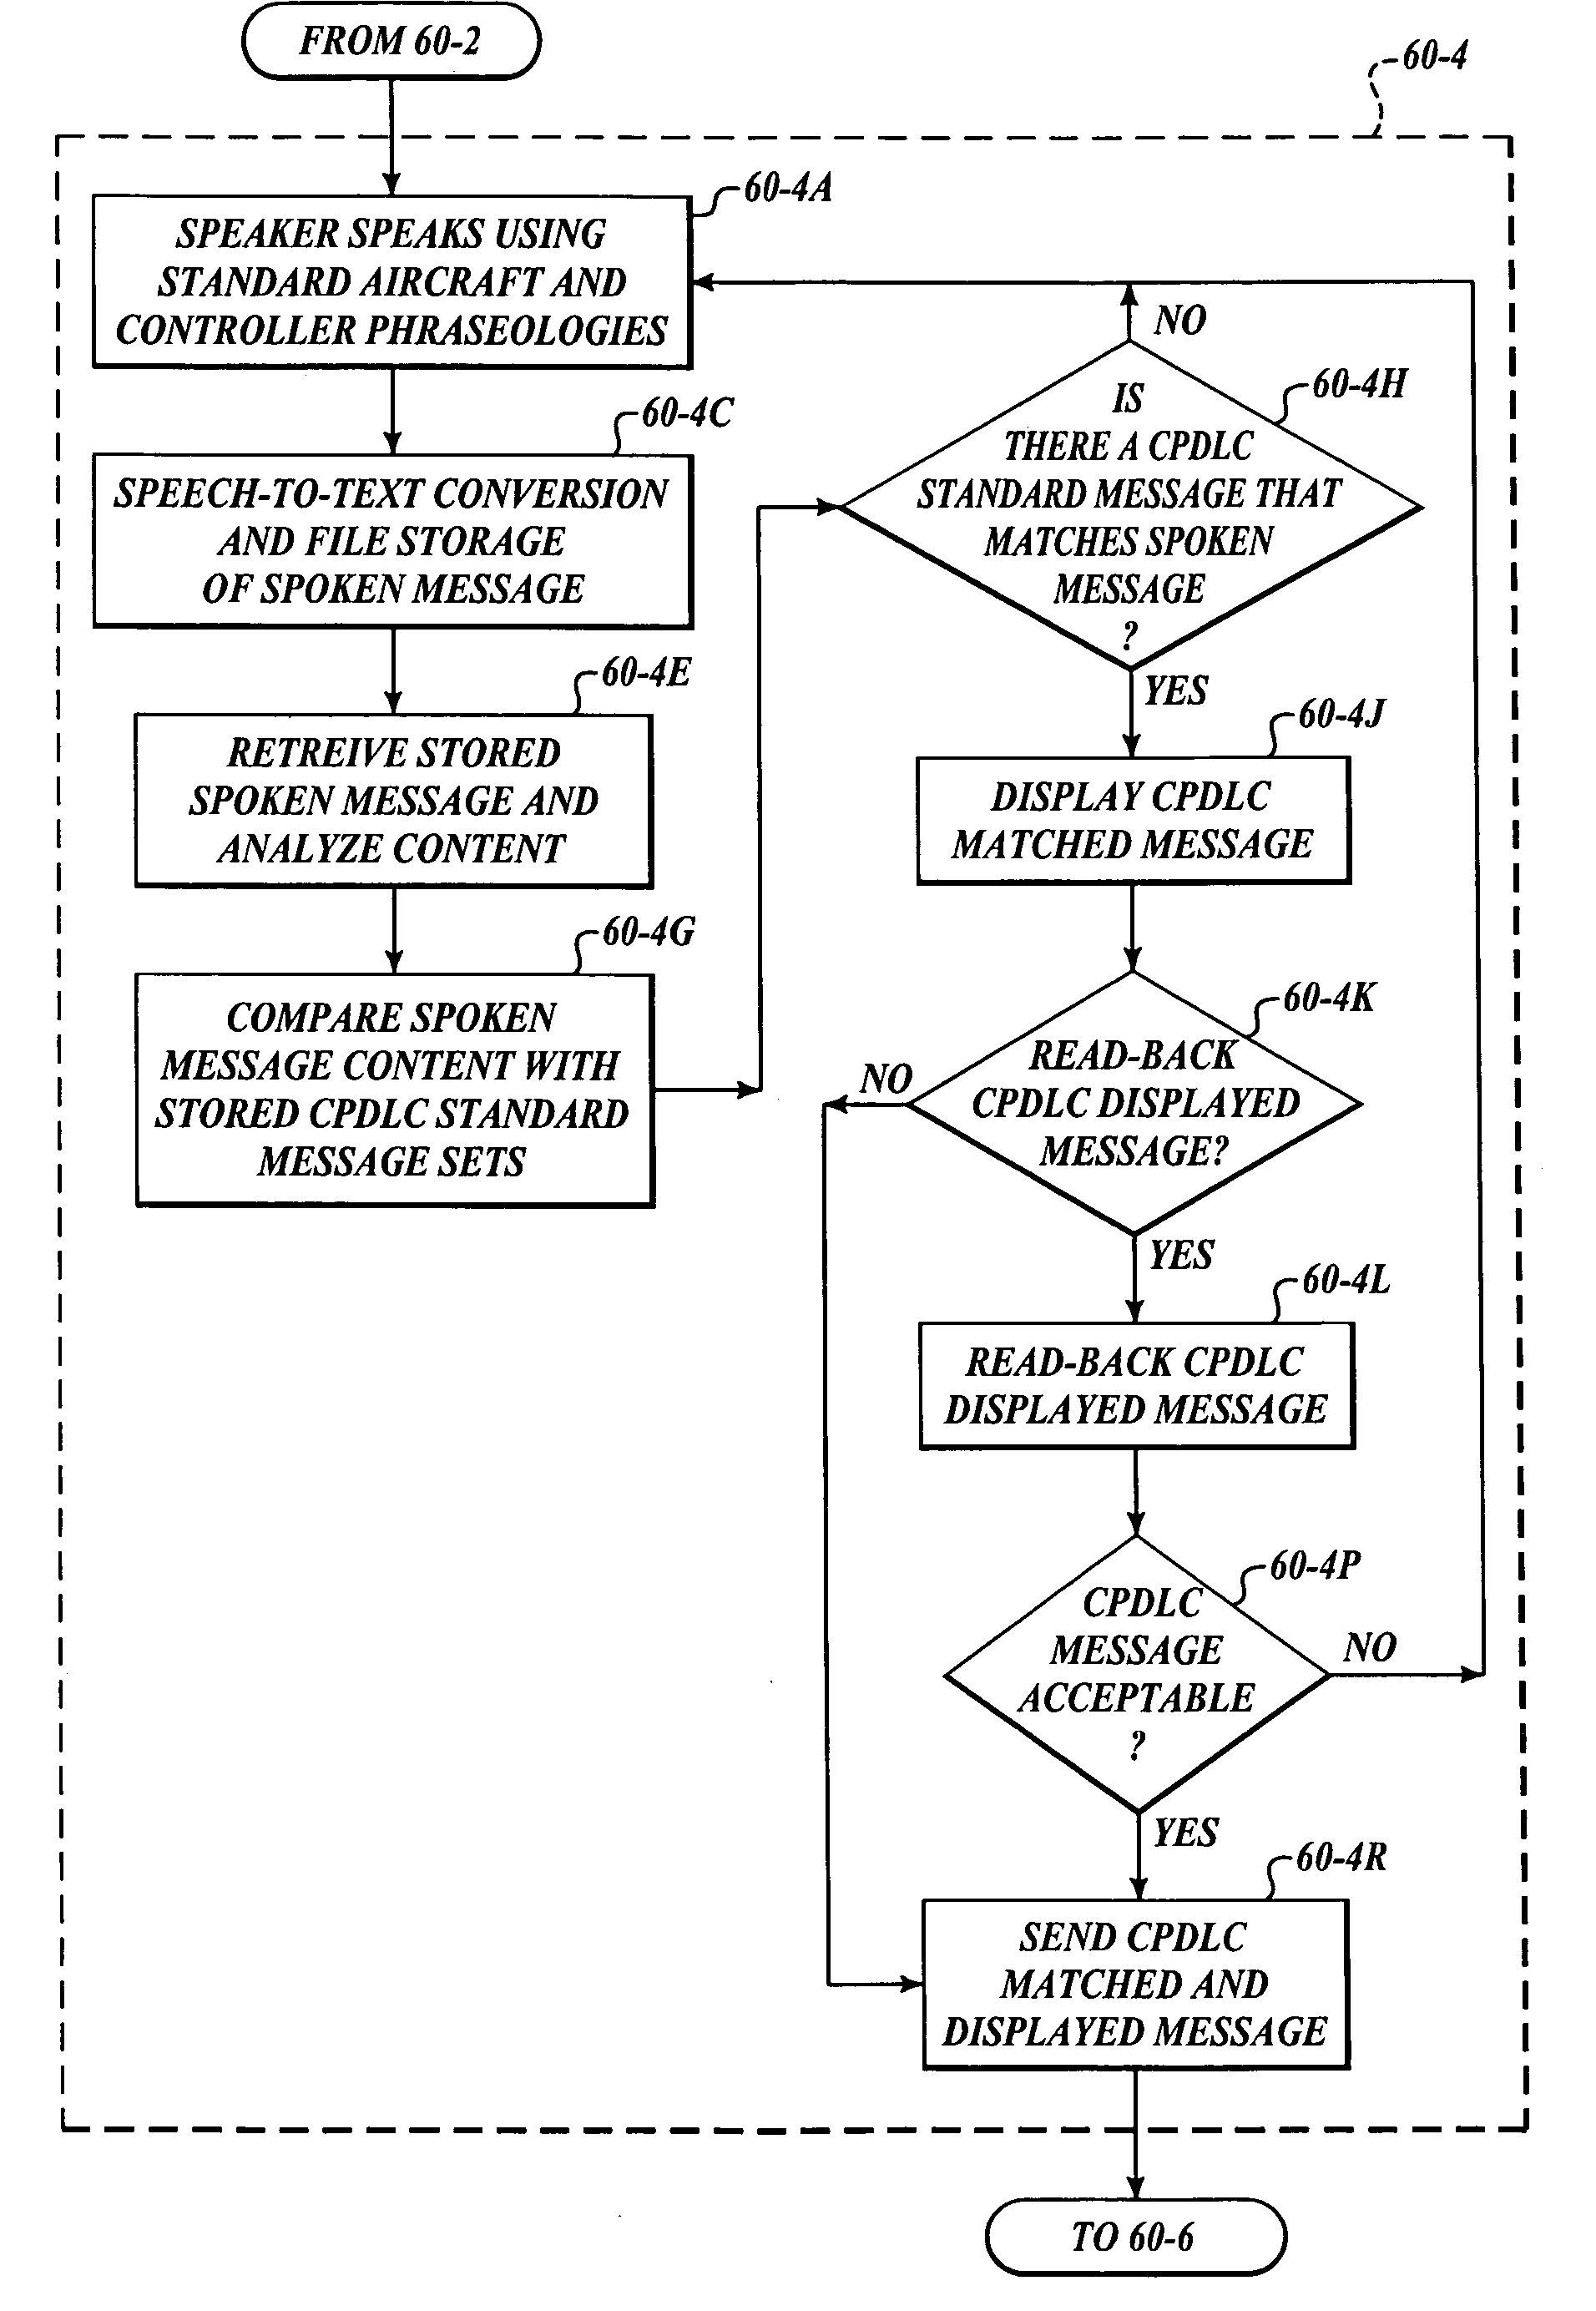 Systems and method of datalink auditory communications for air traffic control